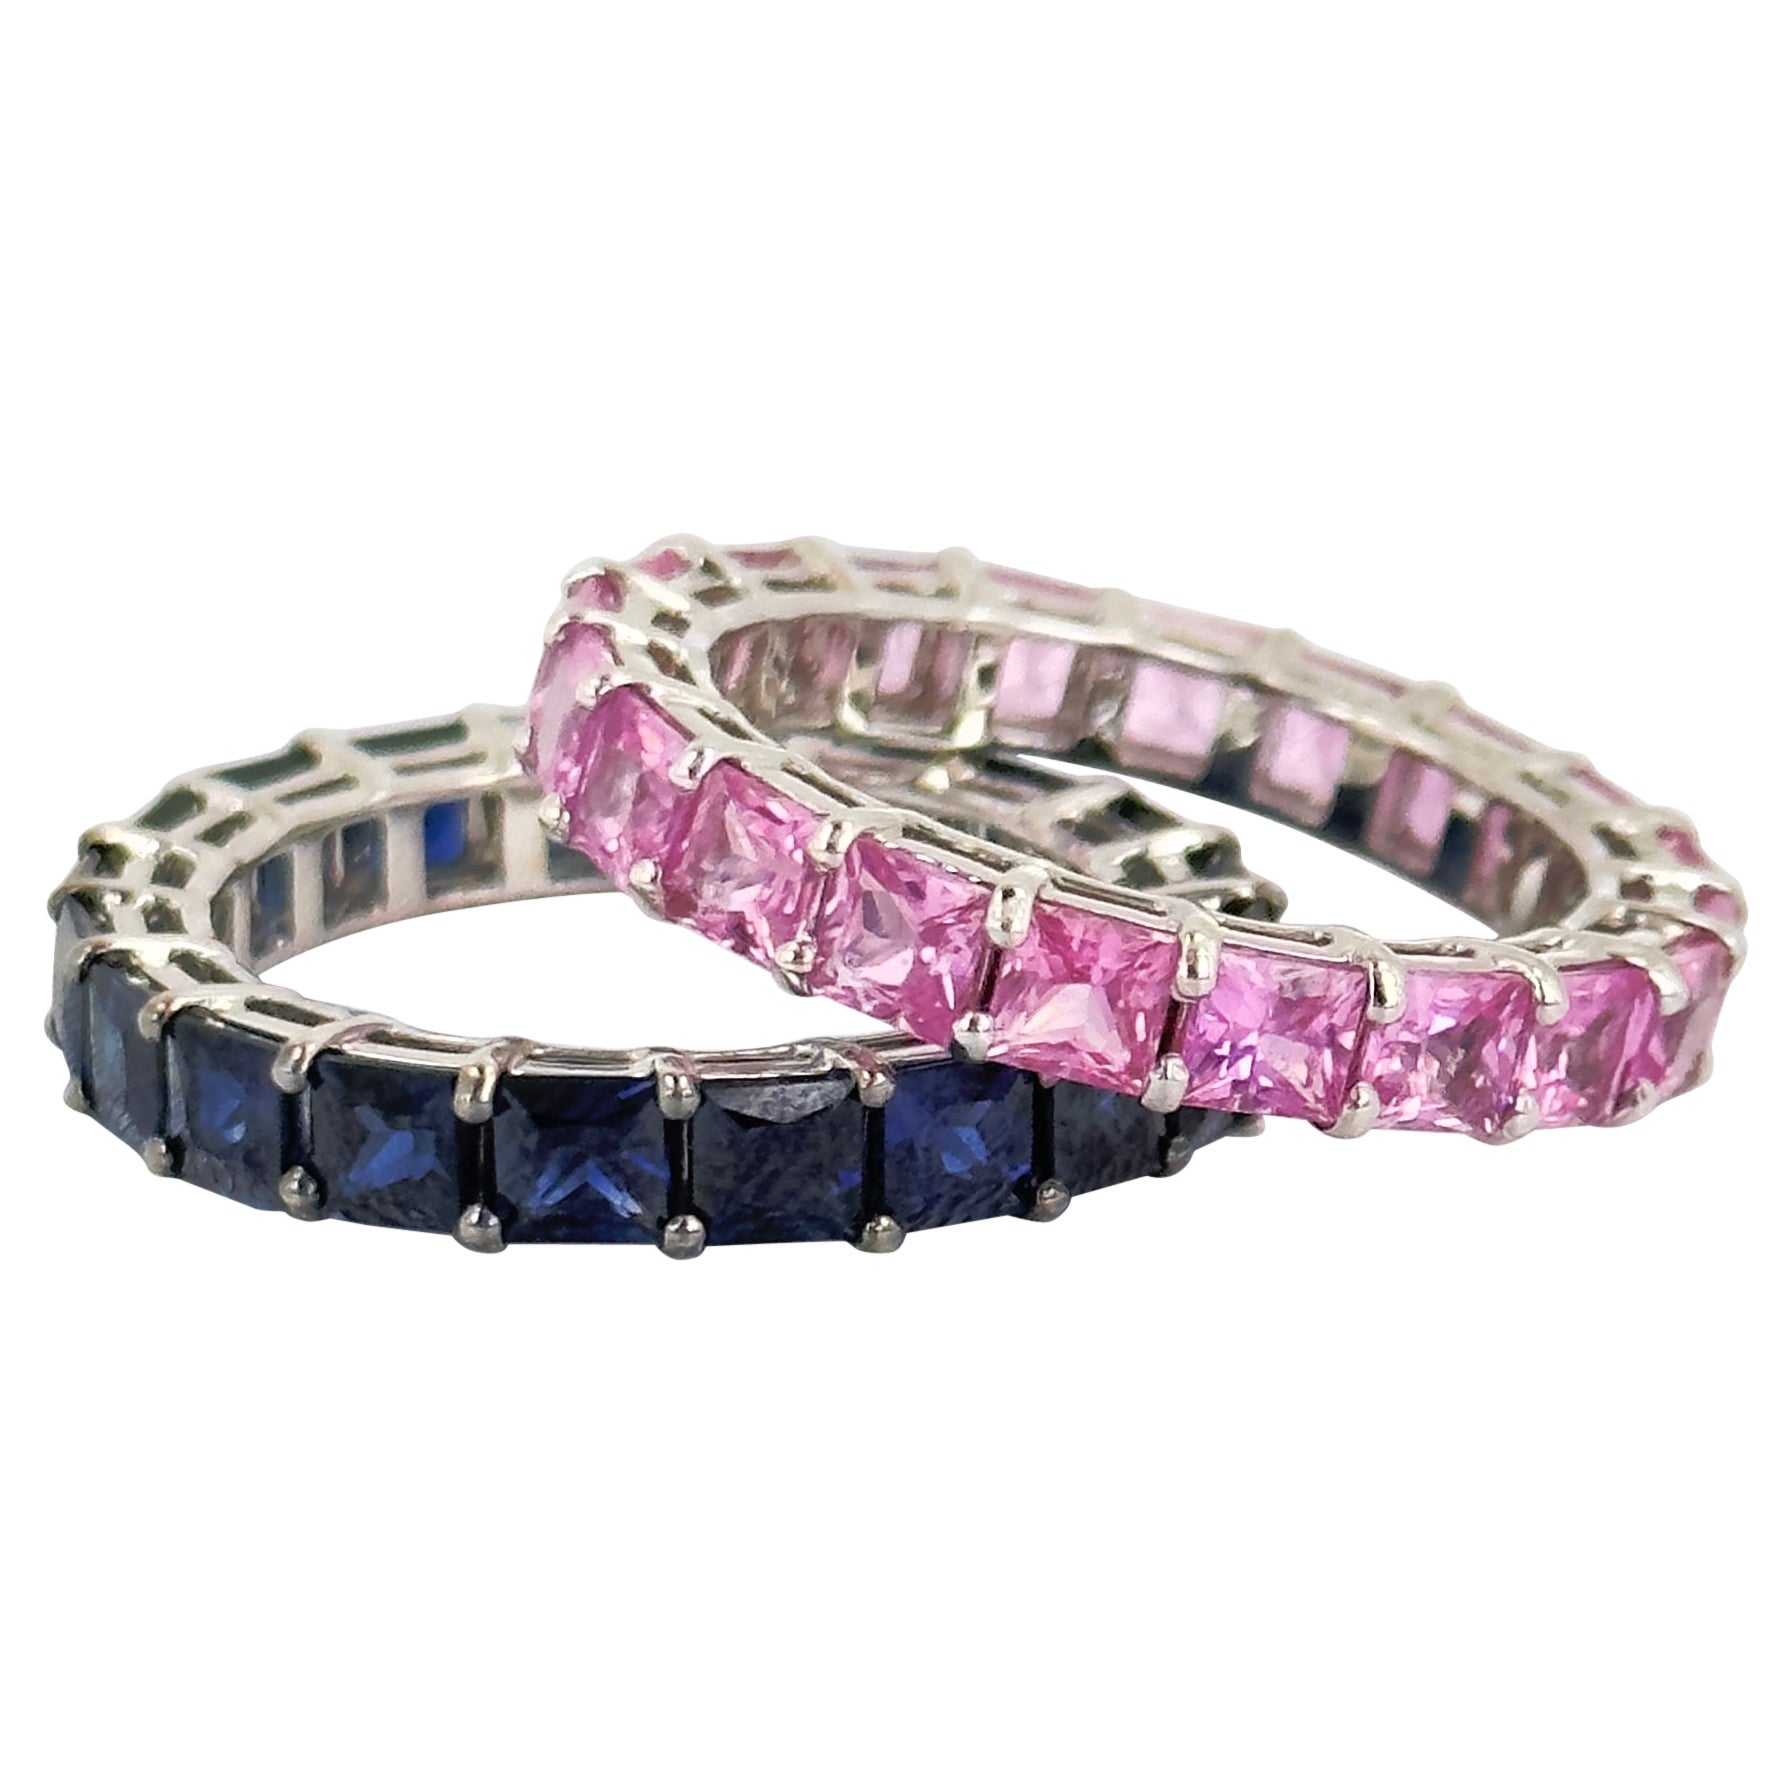 Princess cuts on a princess! Our new blue sapphire and pink sapphire eternity bands are here for you and your princess! Shared prong with a basket design, each princess cut sapphire is held securely so you can flash the ring in public! The pink